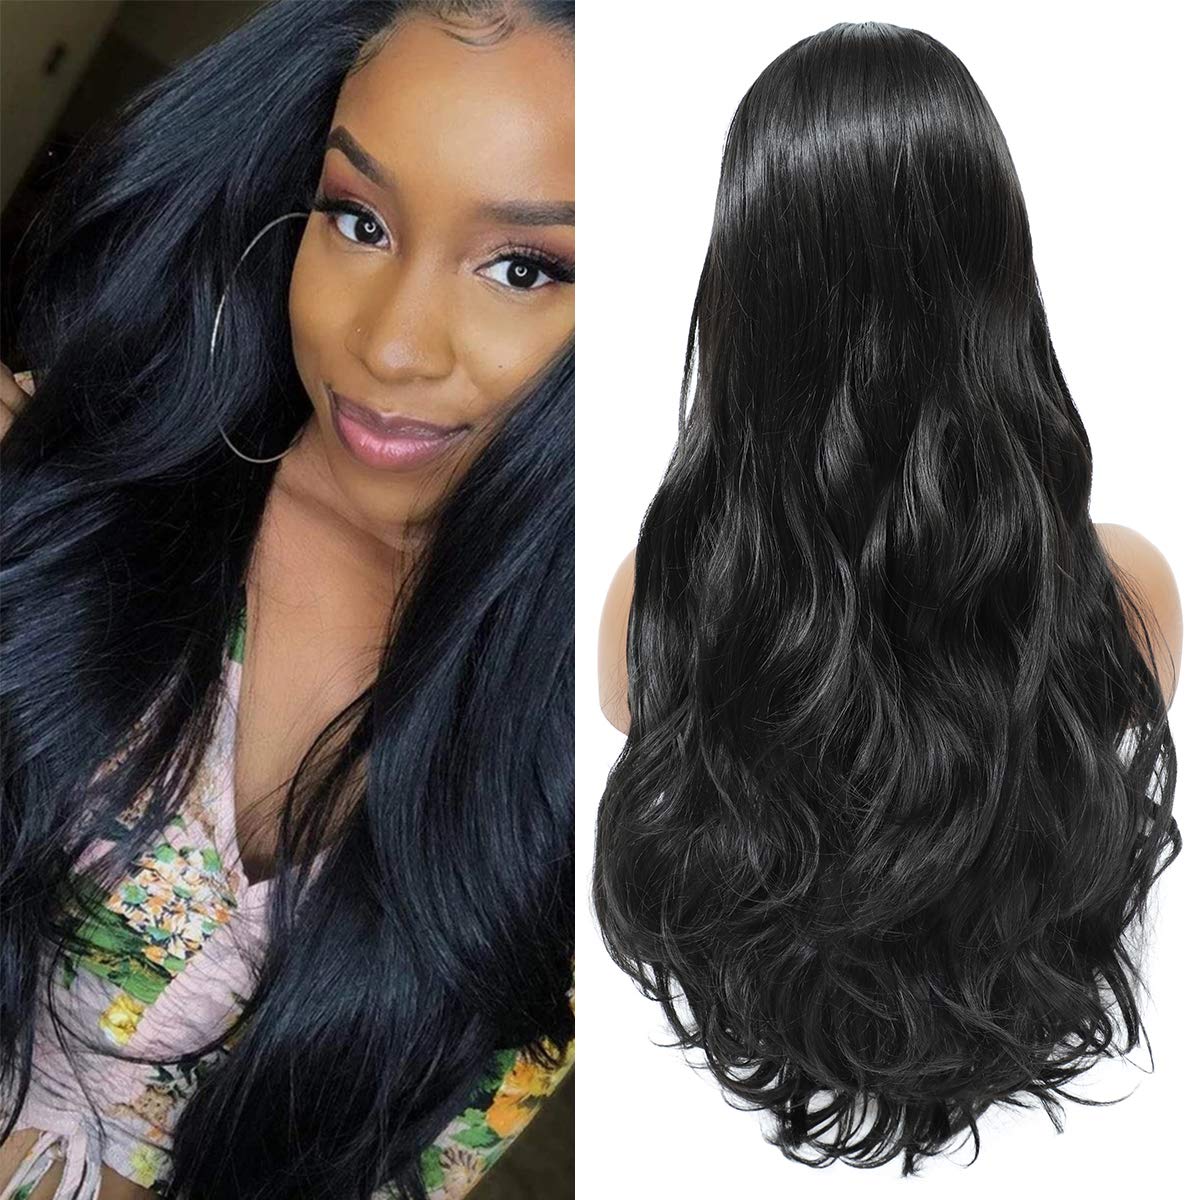 Price:$18.99     PALAK Long Wavy Wig Natural Black Color Middle Part Heat Resistant Long Curly Synthetic Daily Party Wig for Women 26 Inch   Beauty